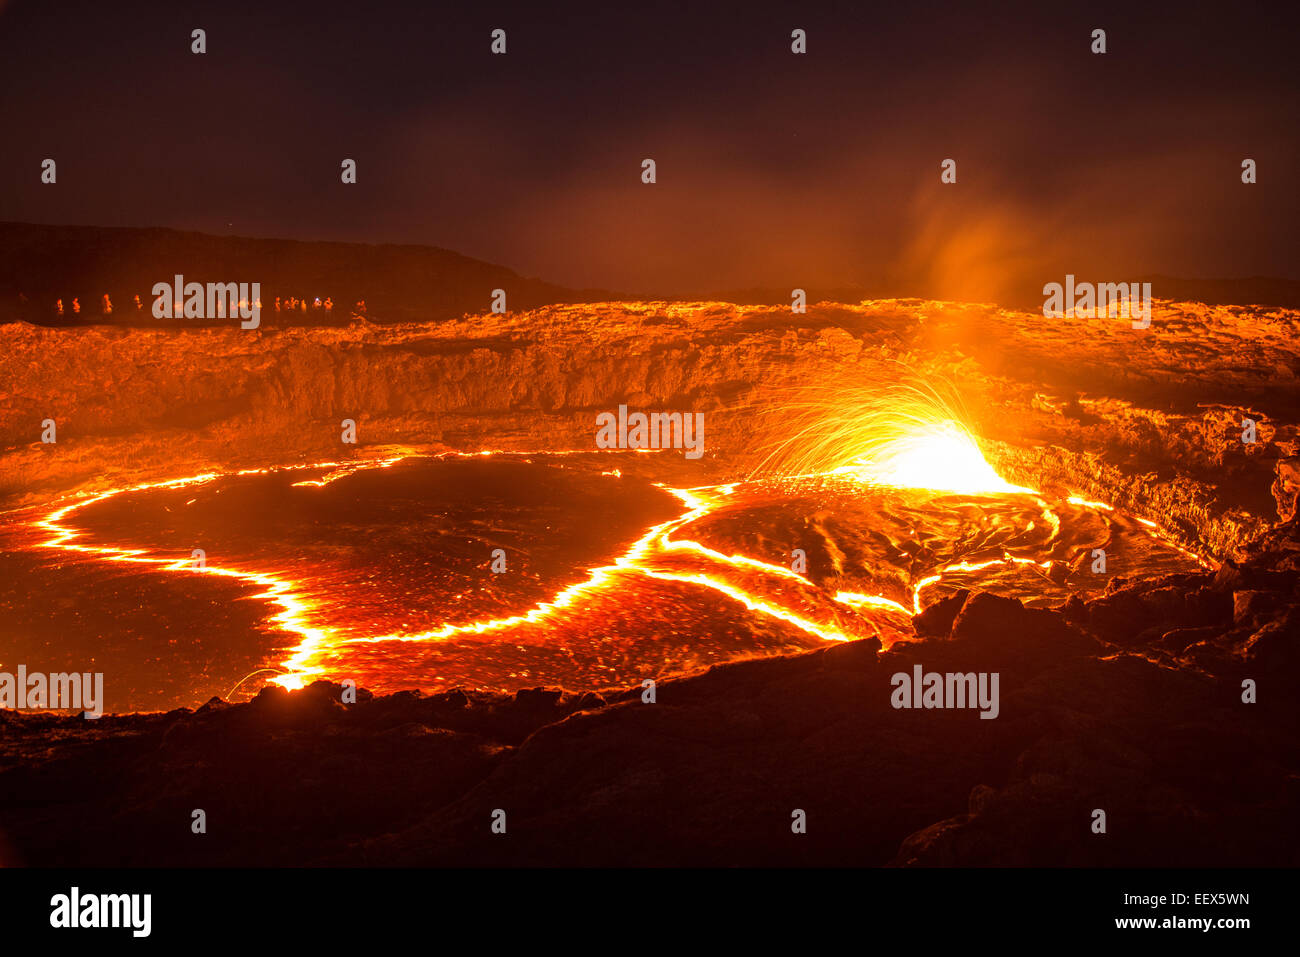 Erta Ale, Erta Ale is an active volcano in the Danakil Depression in north eastern Ethiopia, Africa Stock Photo